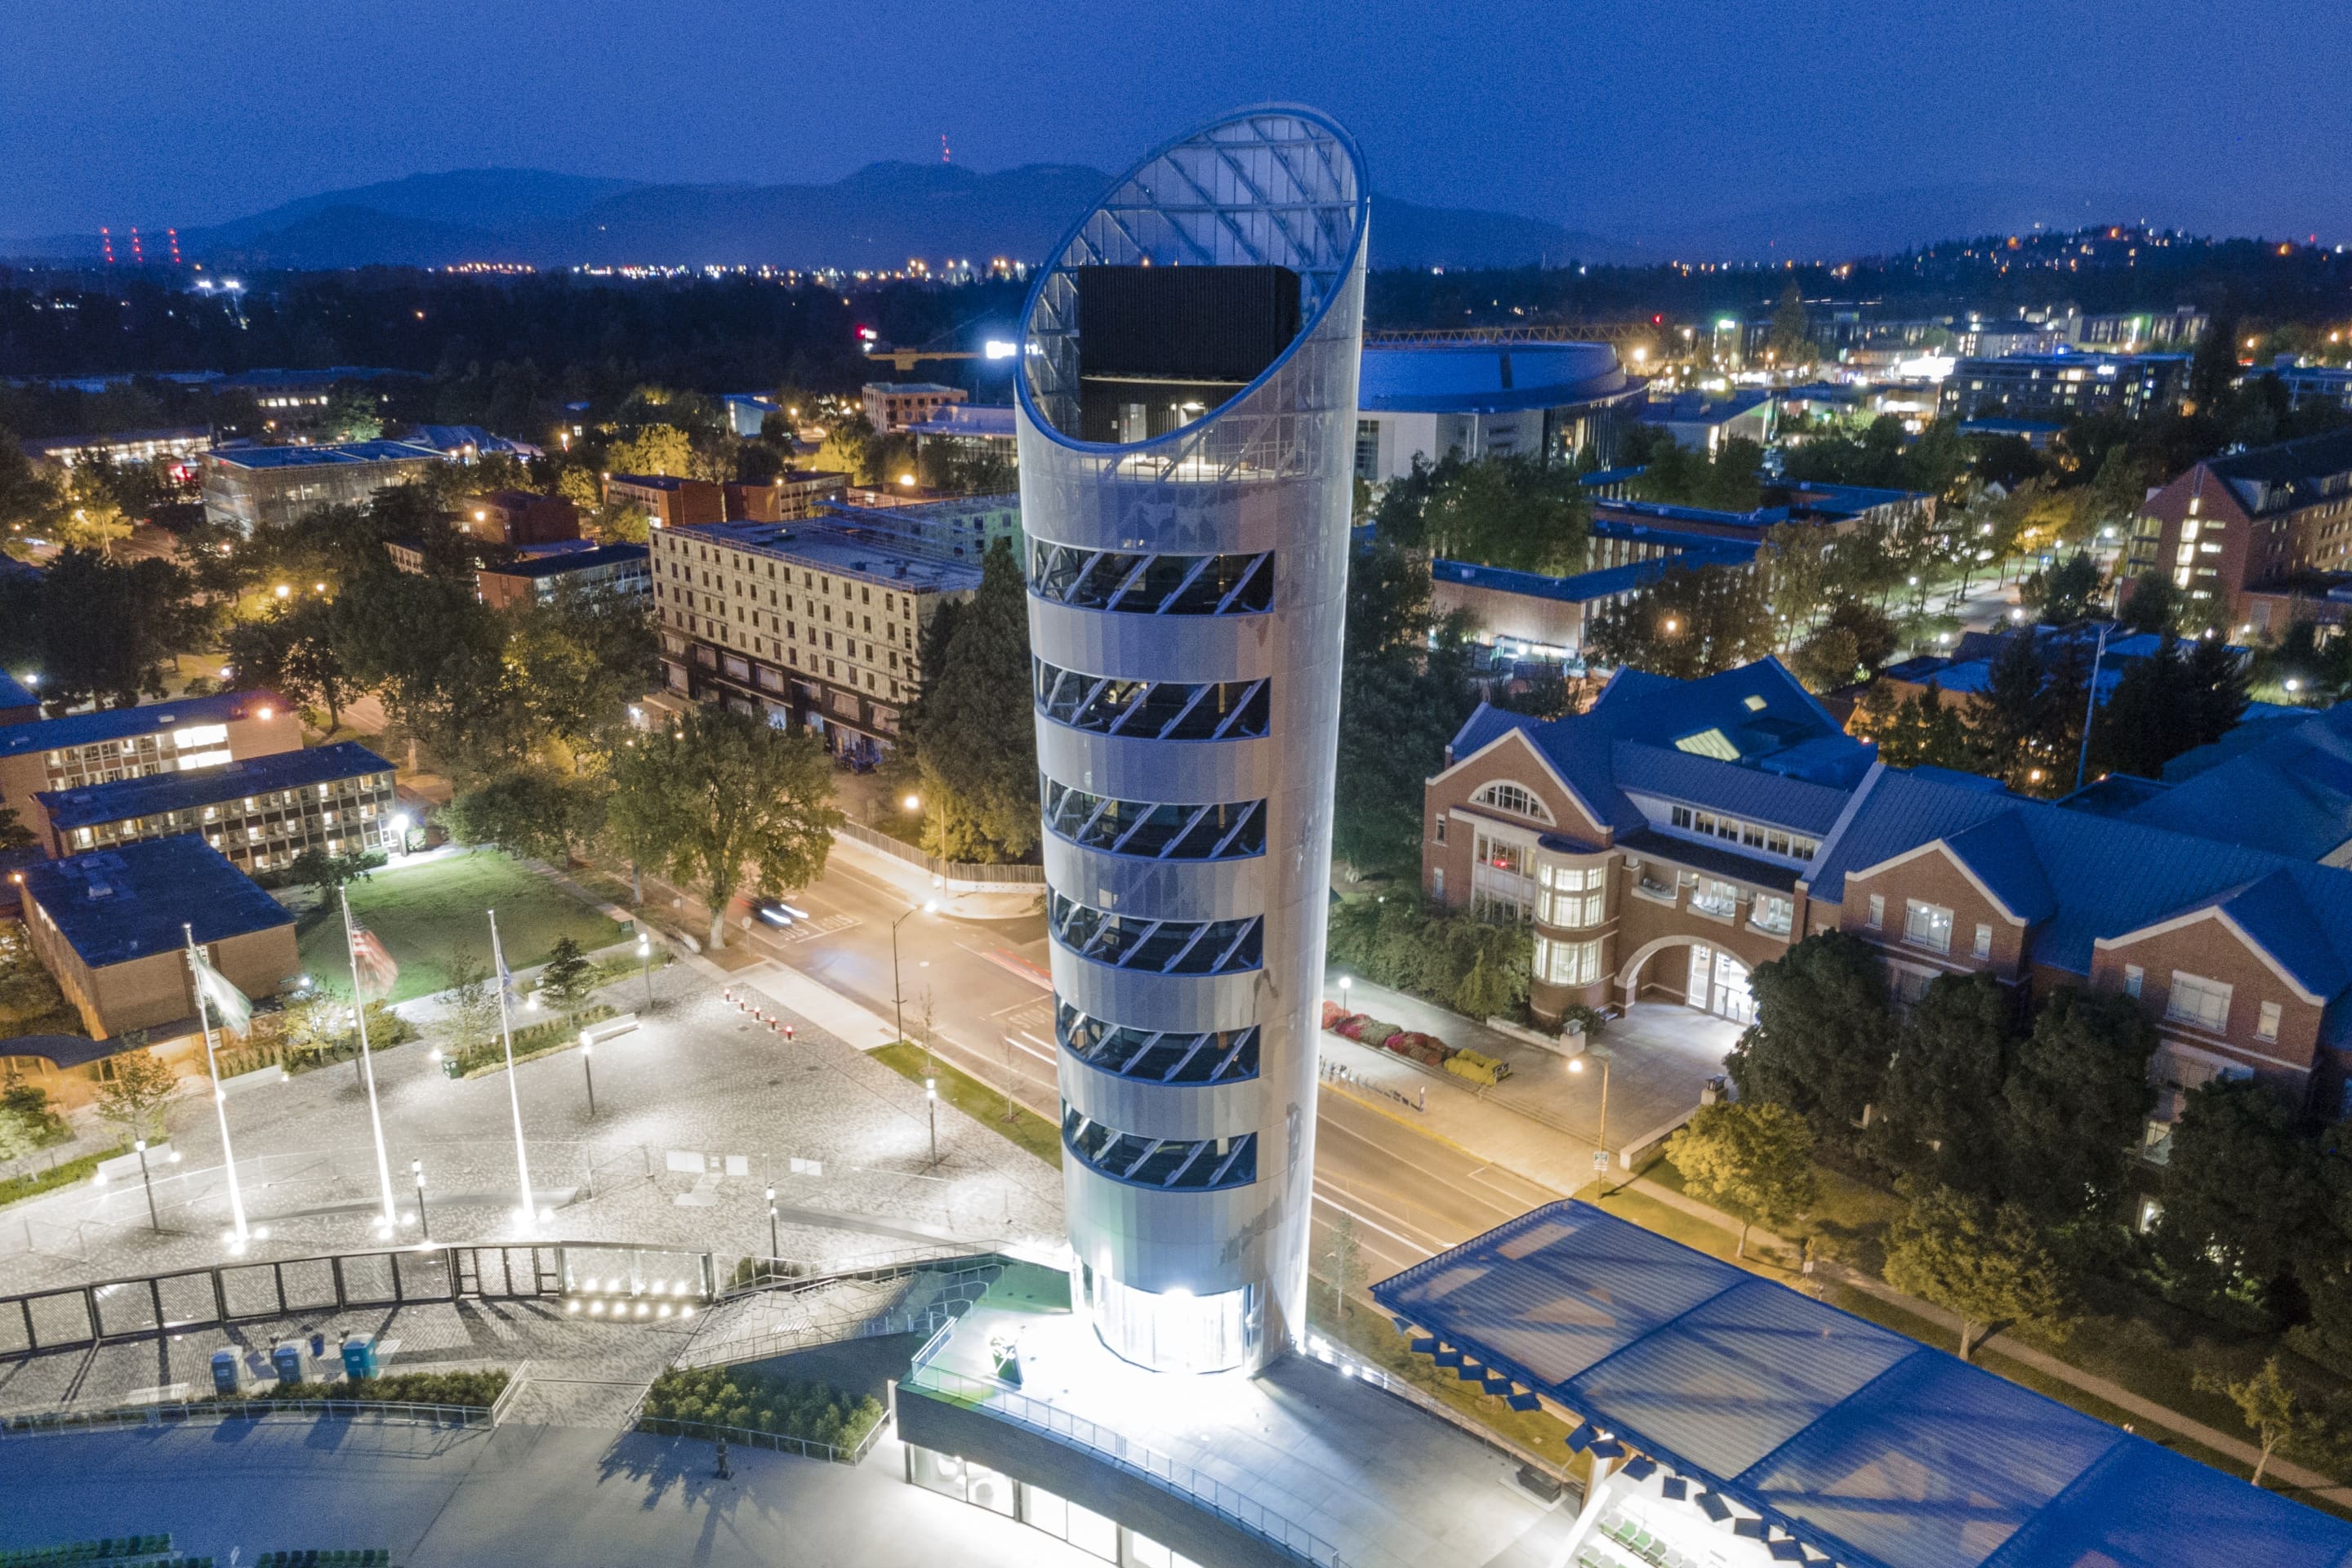 Night view of the 10-story Hayward Field Tower.